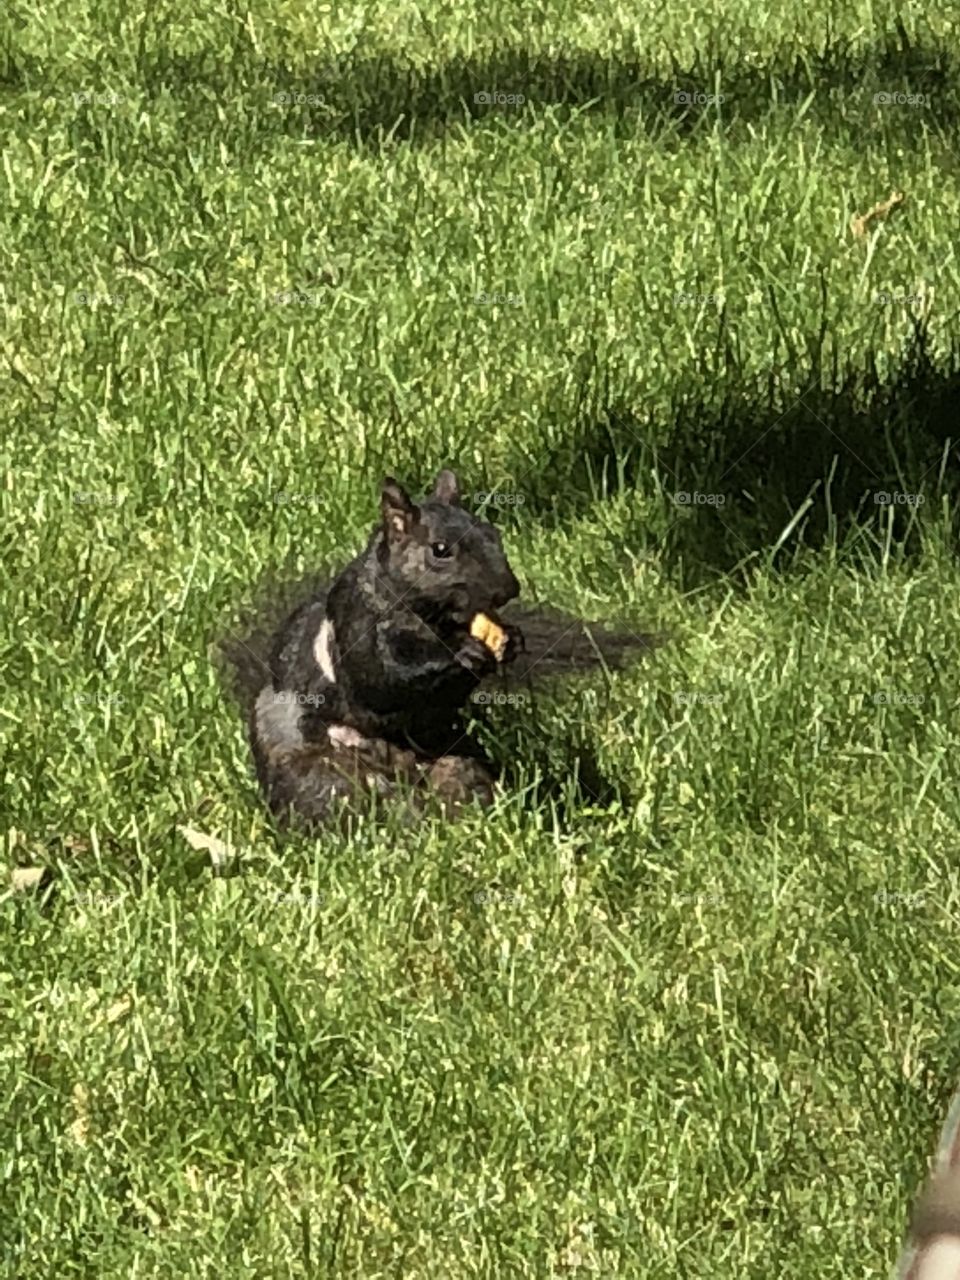 Mr squirrel loves crackers 